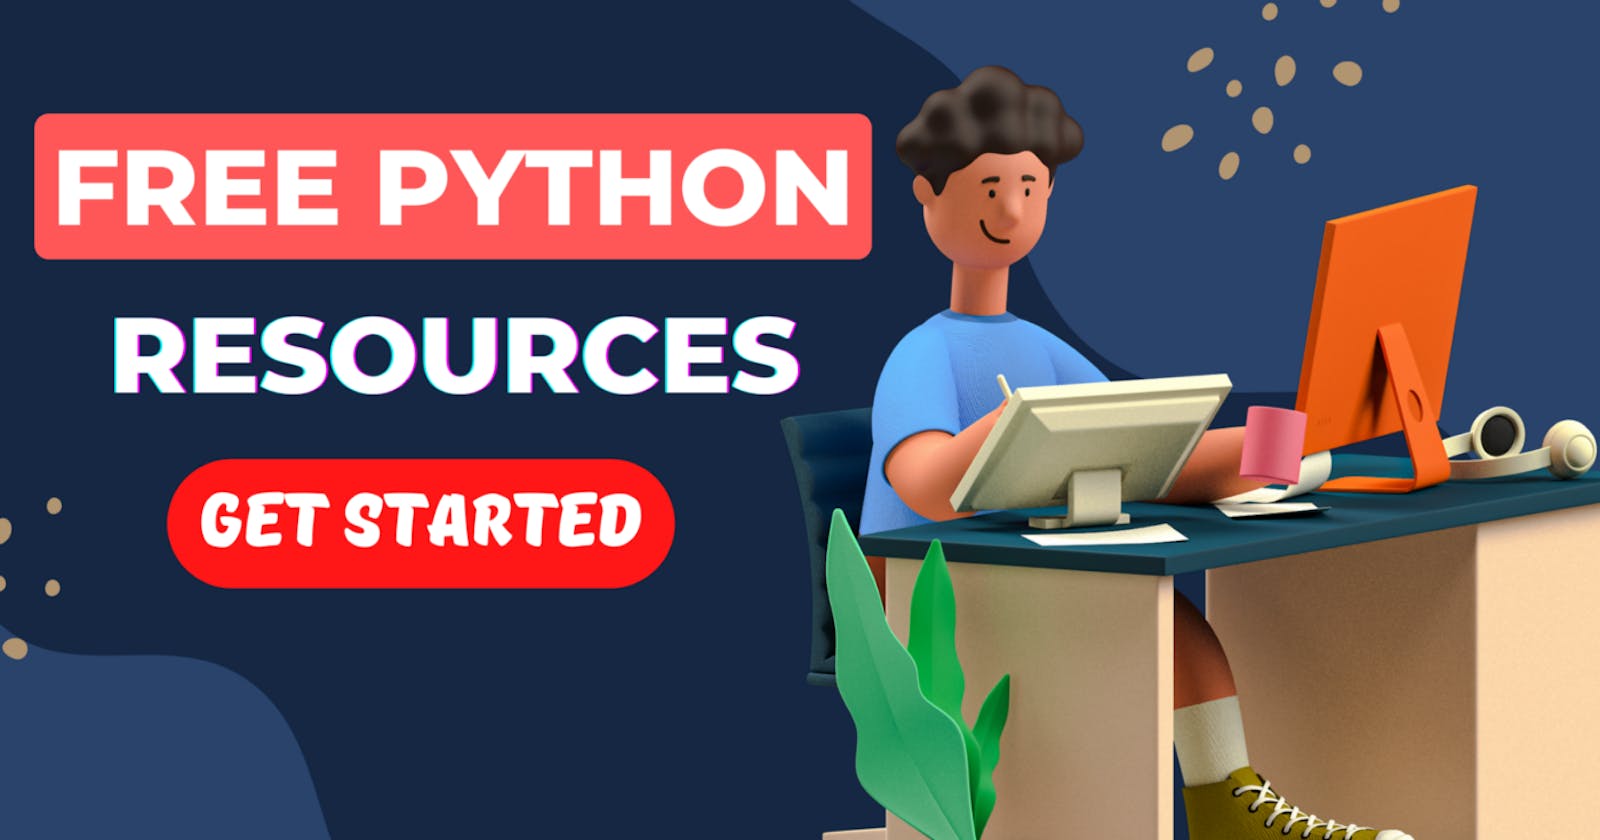 Make use of these free python courses available on Udemy